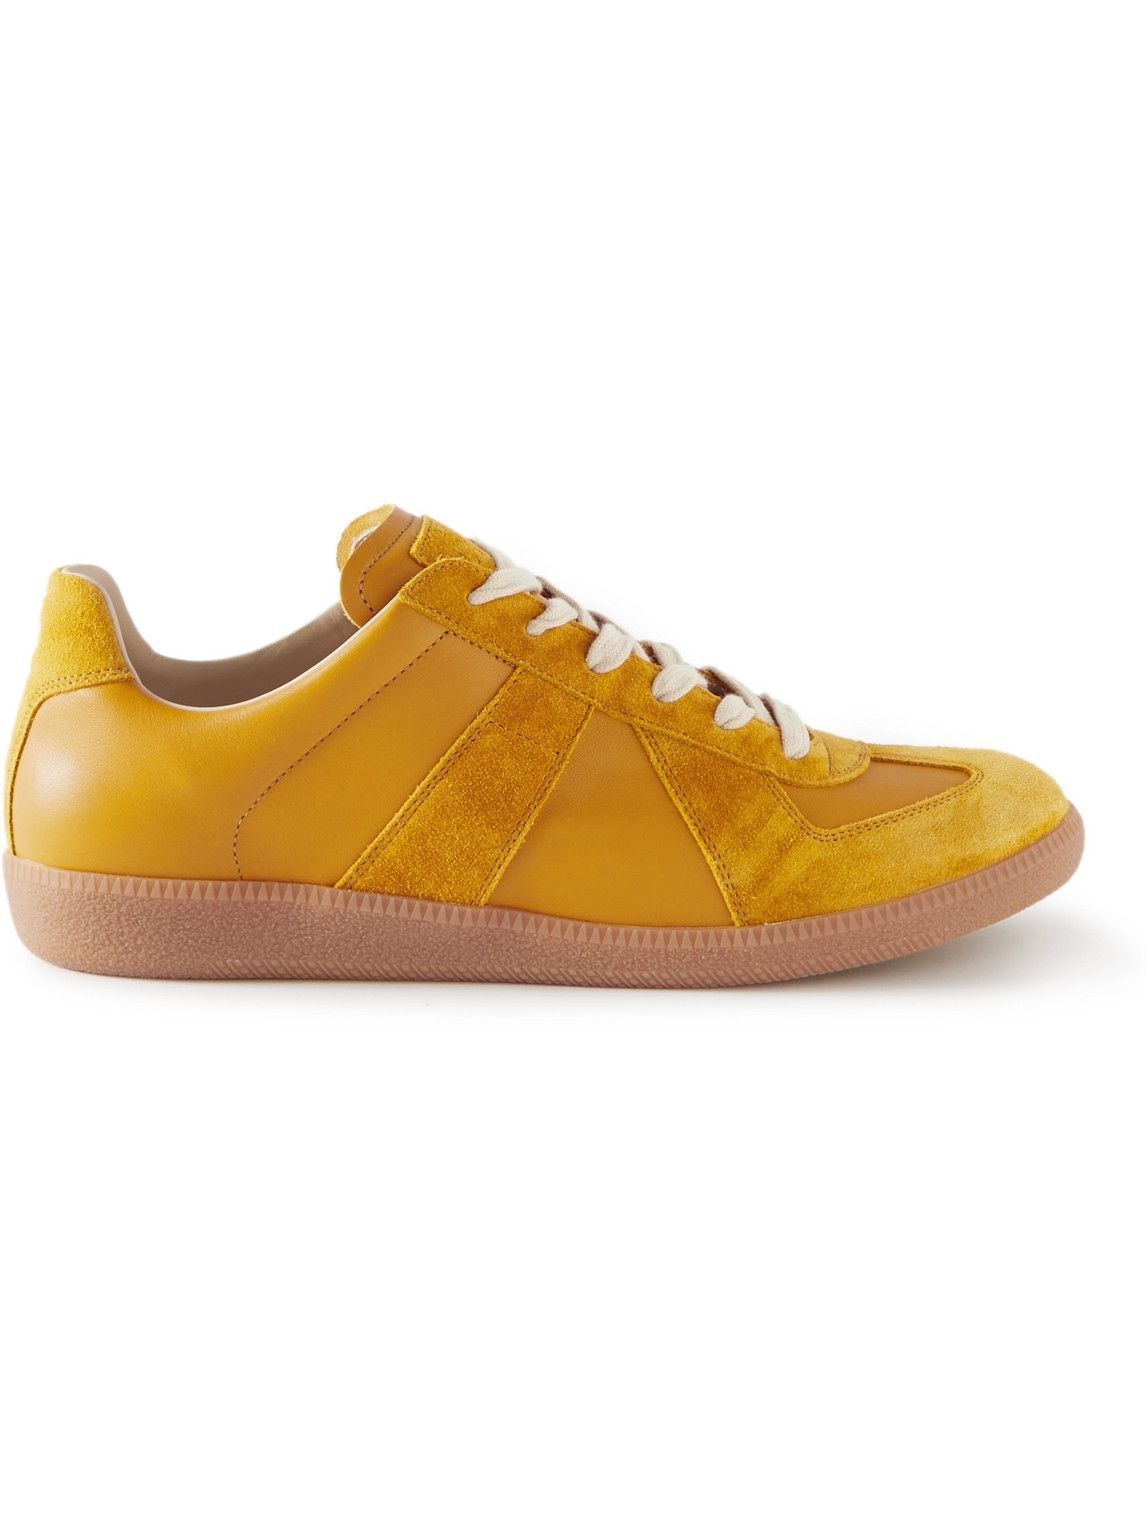 Maison Margiela - Replica Leather and Suede Sneakers - Yellow Maison ...